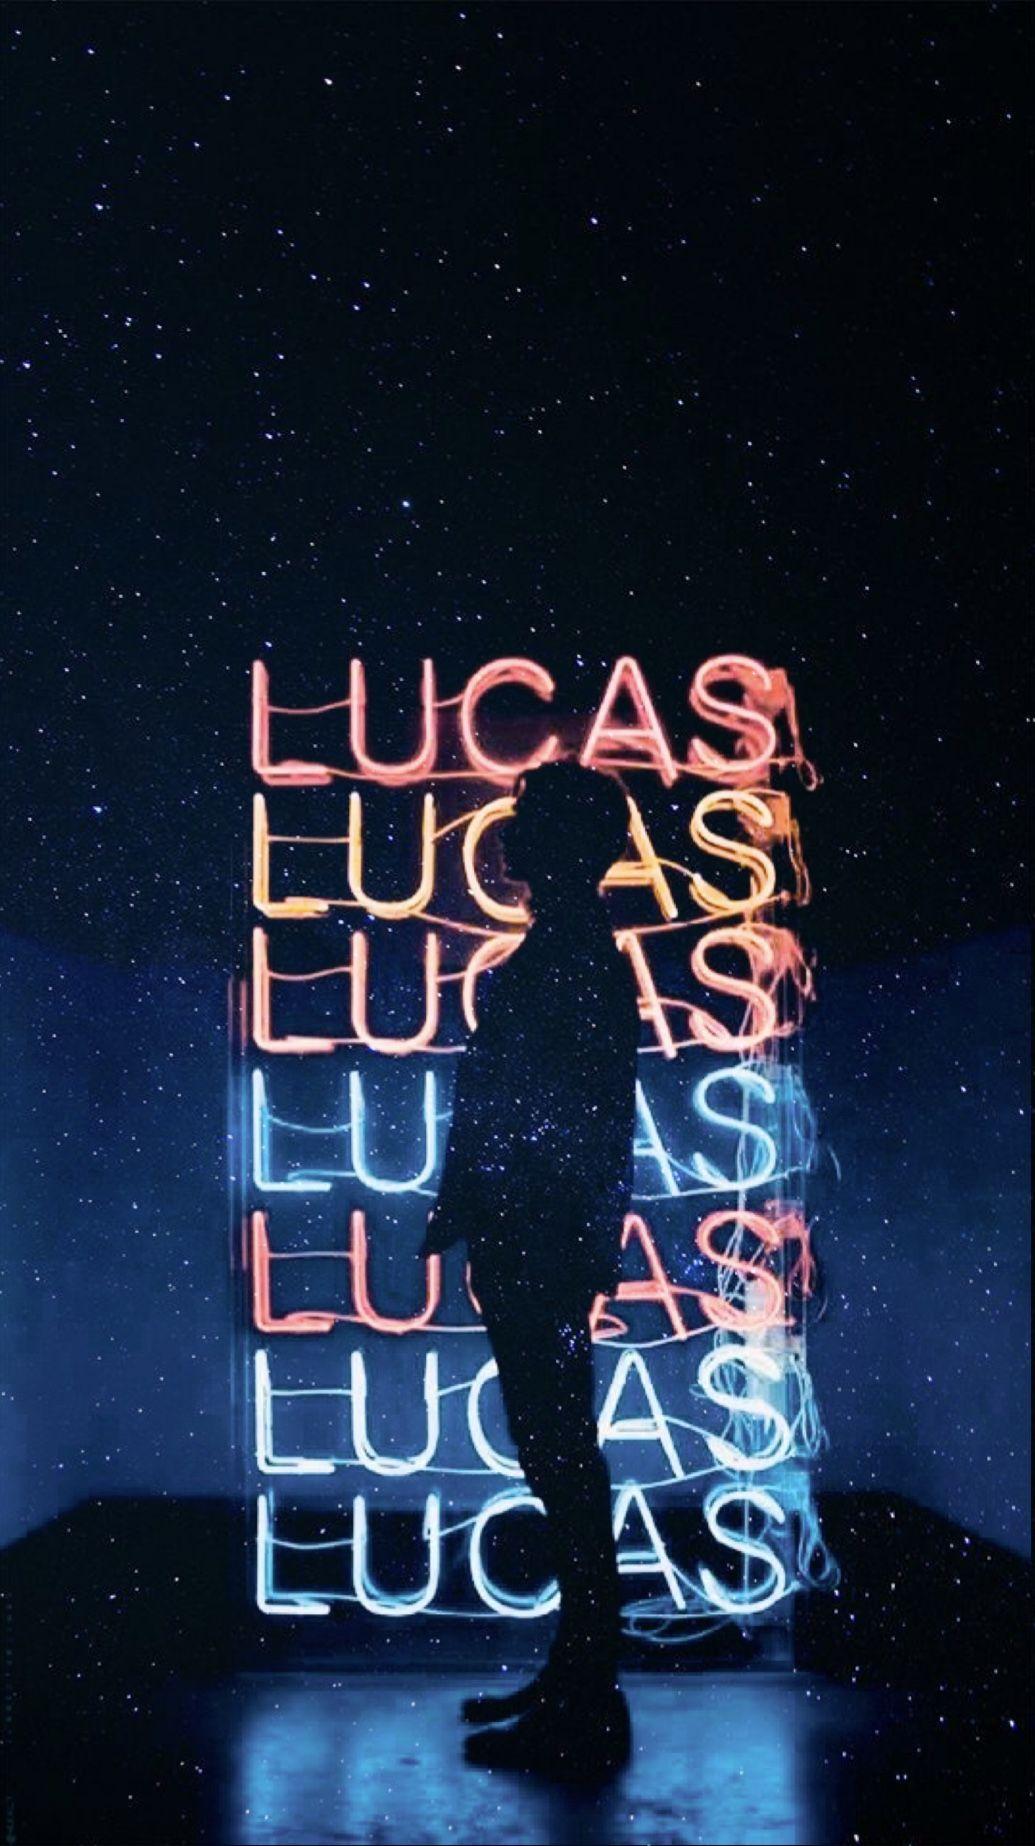 nct2018 #nct Lucas. Kpop. NCT, Nct 127 and Lucas nct